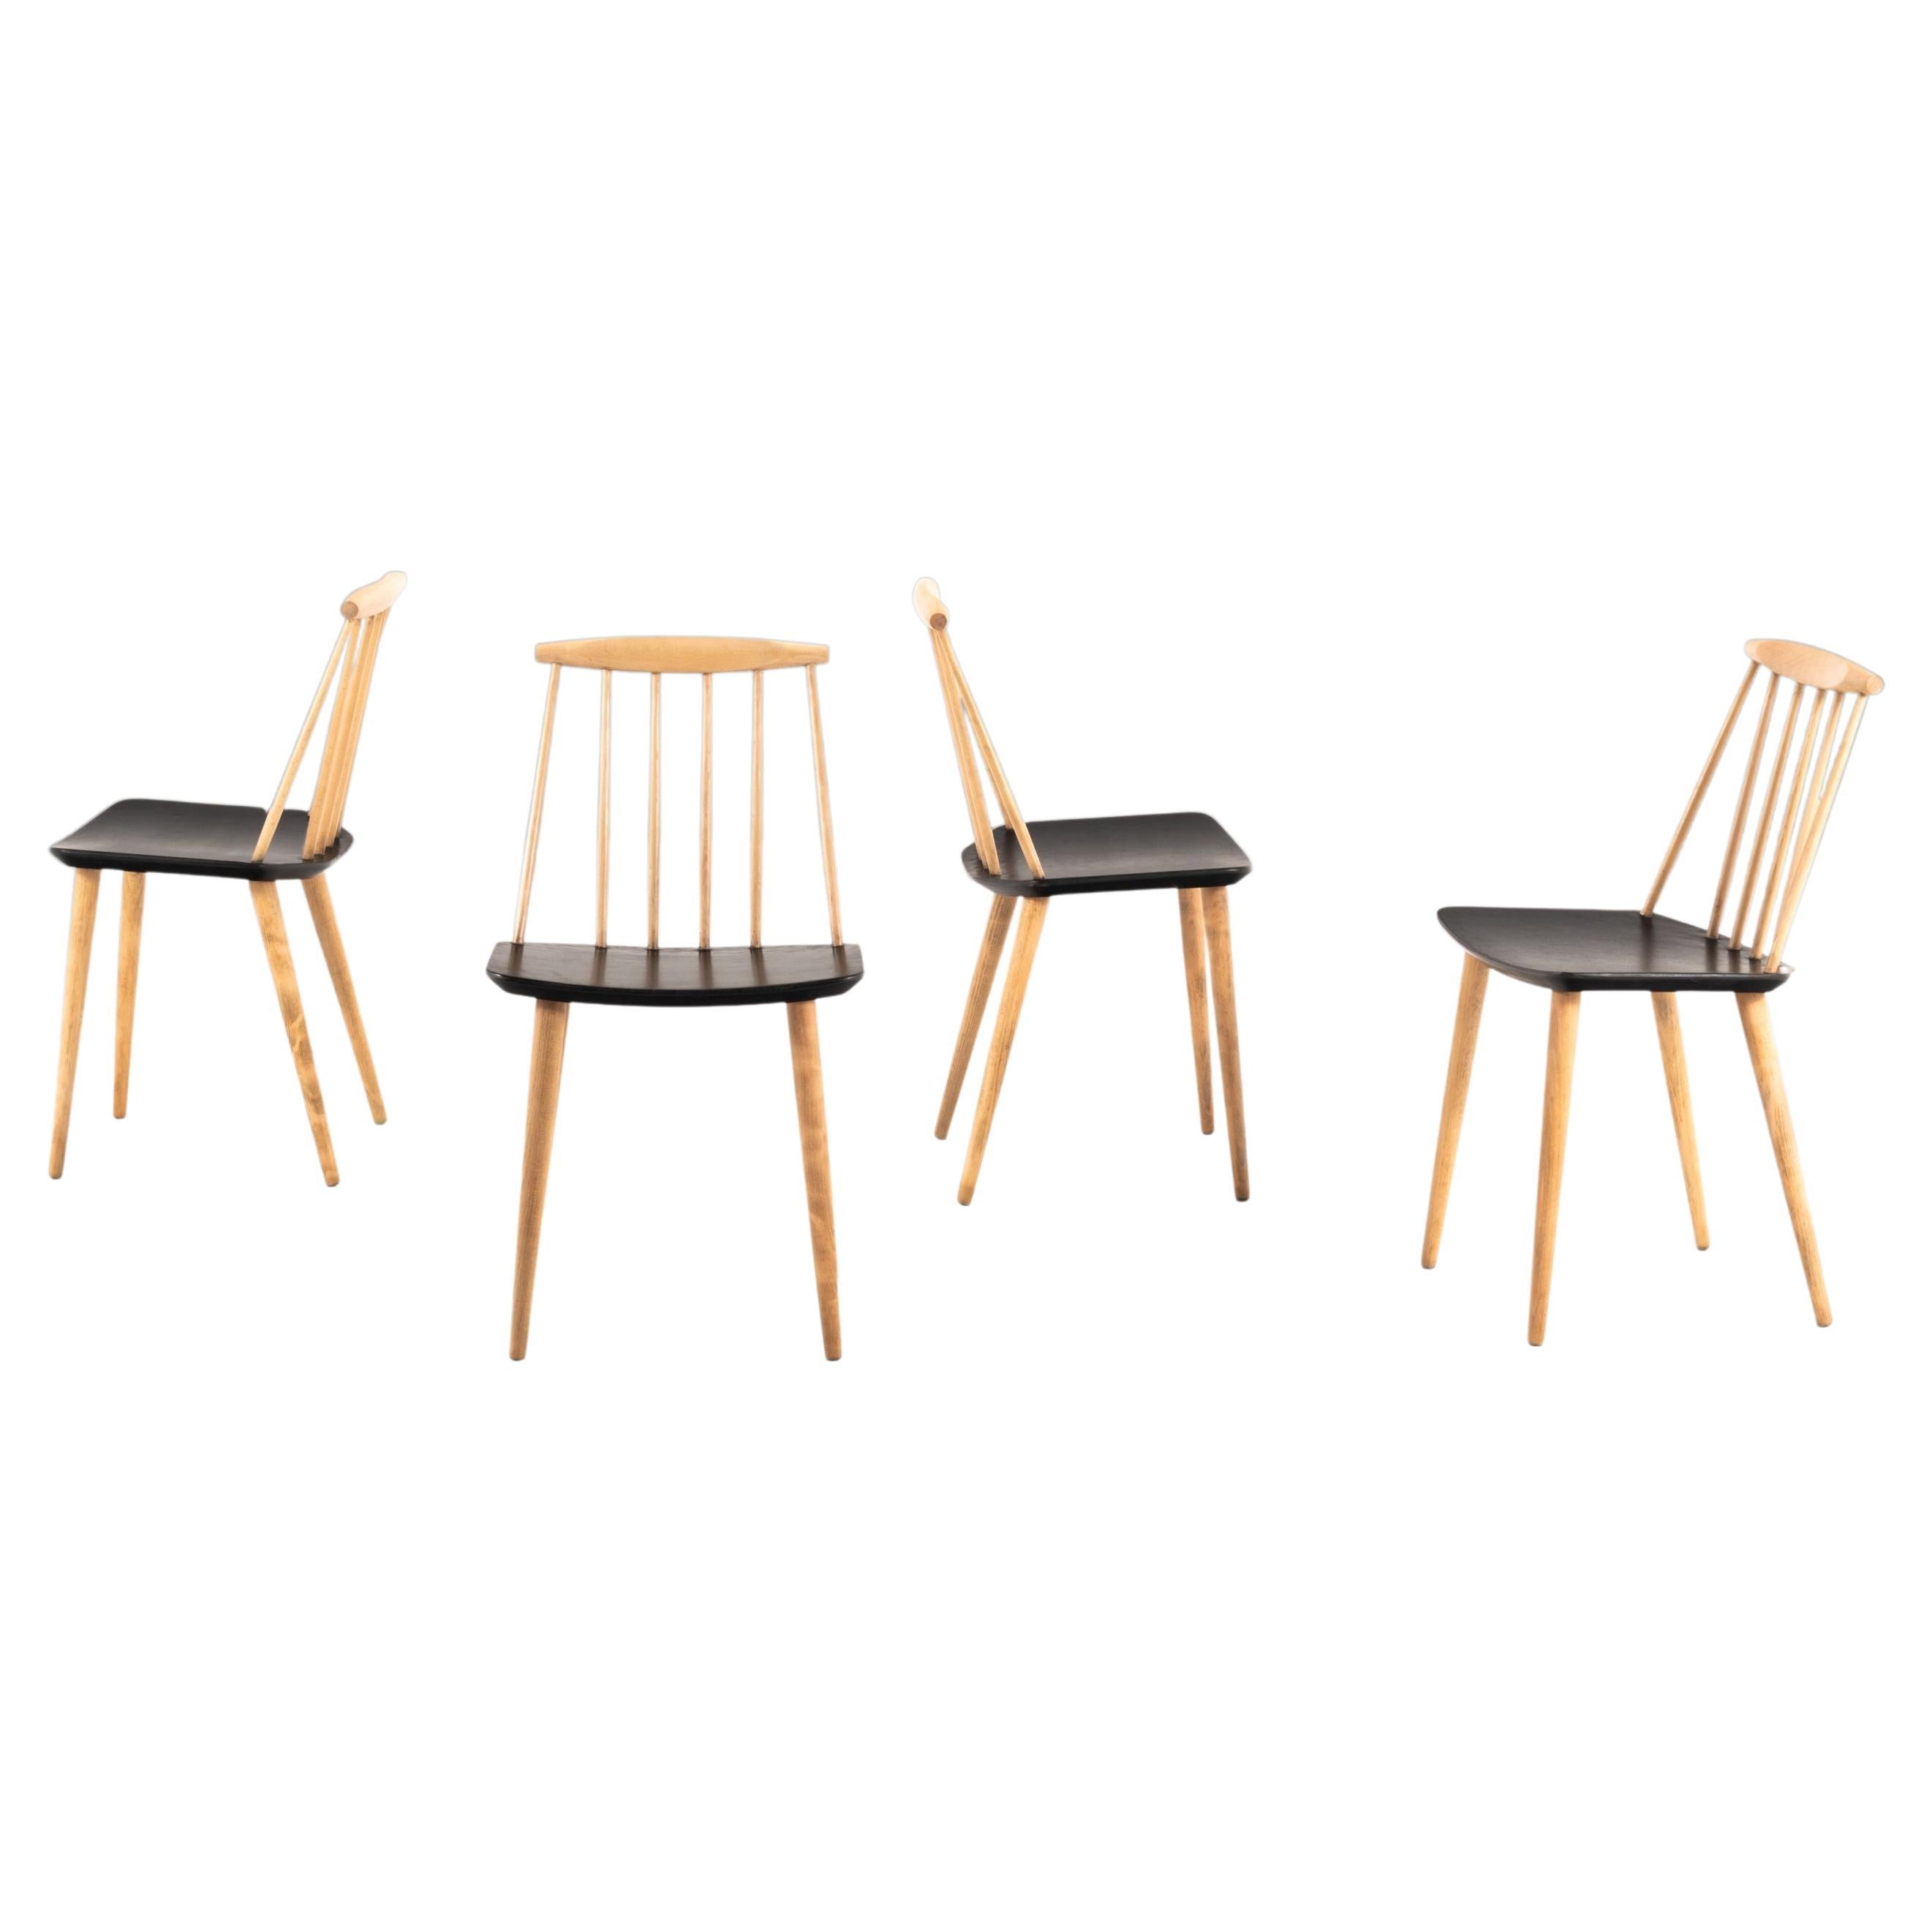 Set of 4 Model J 77 'Farmhouse' Chairs in Beech by Folke Palsson for FDB, 1960's For Sale